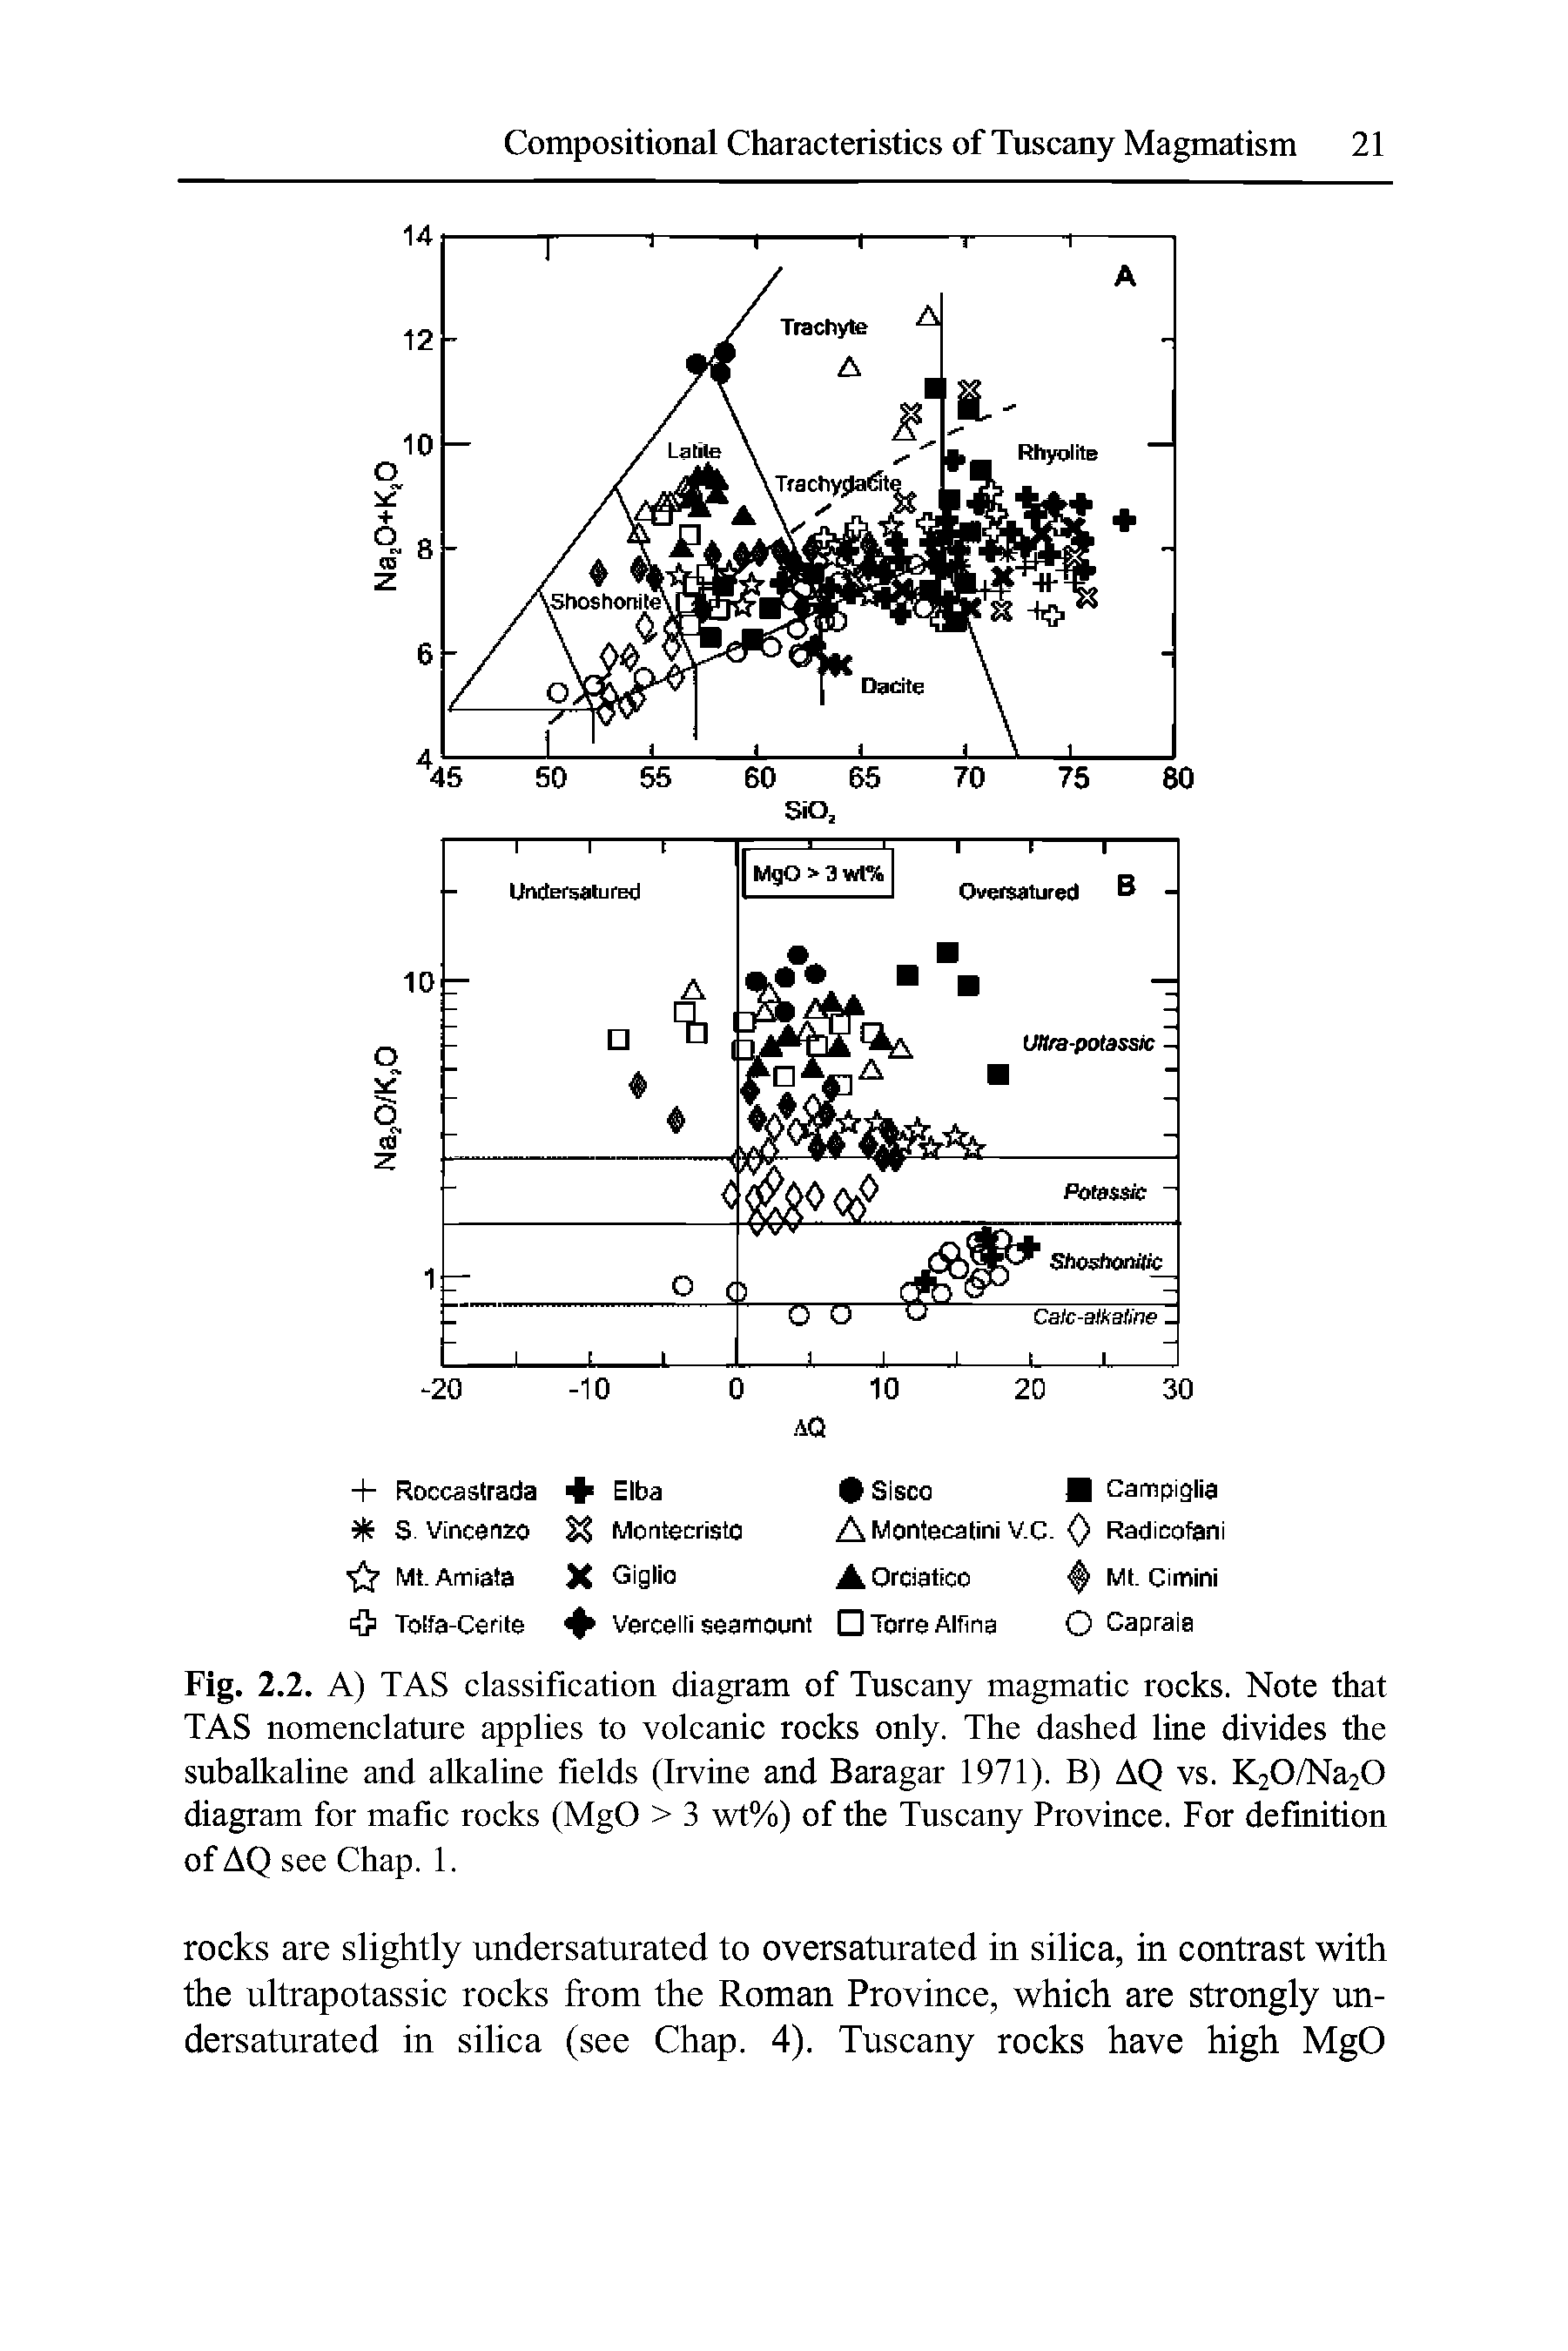 Fig. 2.2. A) TAS classification diagram of Tuscany magmatic rocks. Note that TAS nomenclature applies to volcanic rocks only. The dashed line divides the subalkaline and alkaline fields (Irvine and Baragar 1971). B) AQ vs. K20/Na20 diagram for mafic rocks (MgO > 3 wt%) of the Tuscany Province. For definition of AQ see Chap. 1.